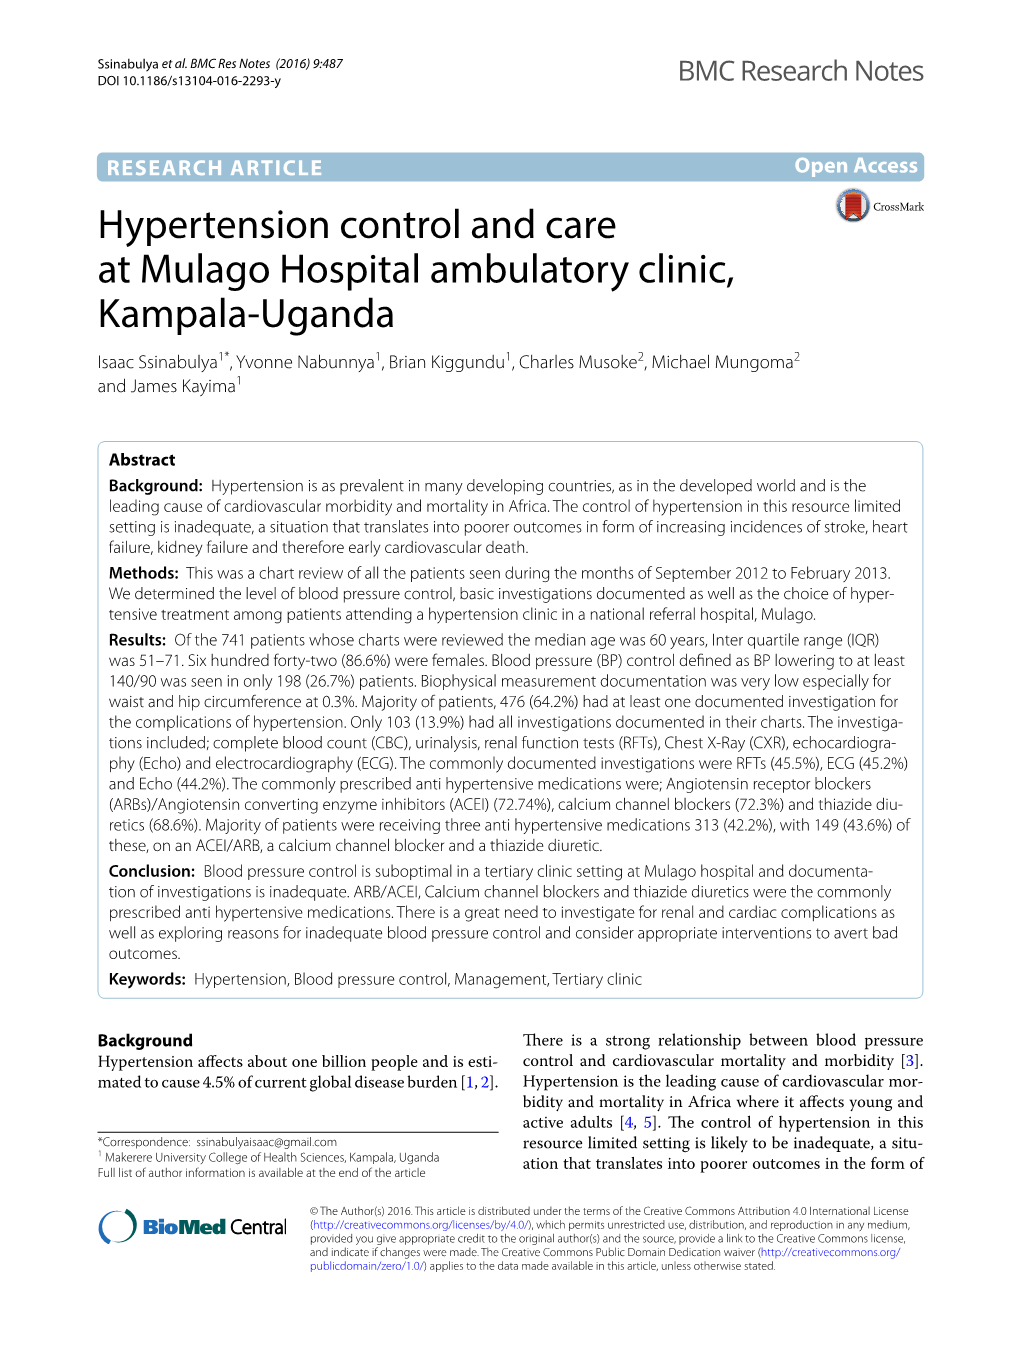 Hypertension Control and Care at Mulago Hospital Ambulatory Clinic